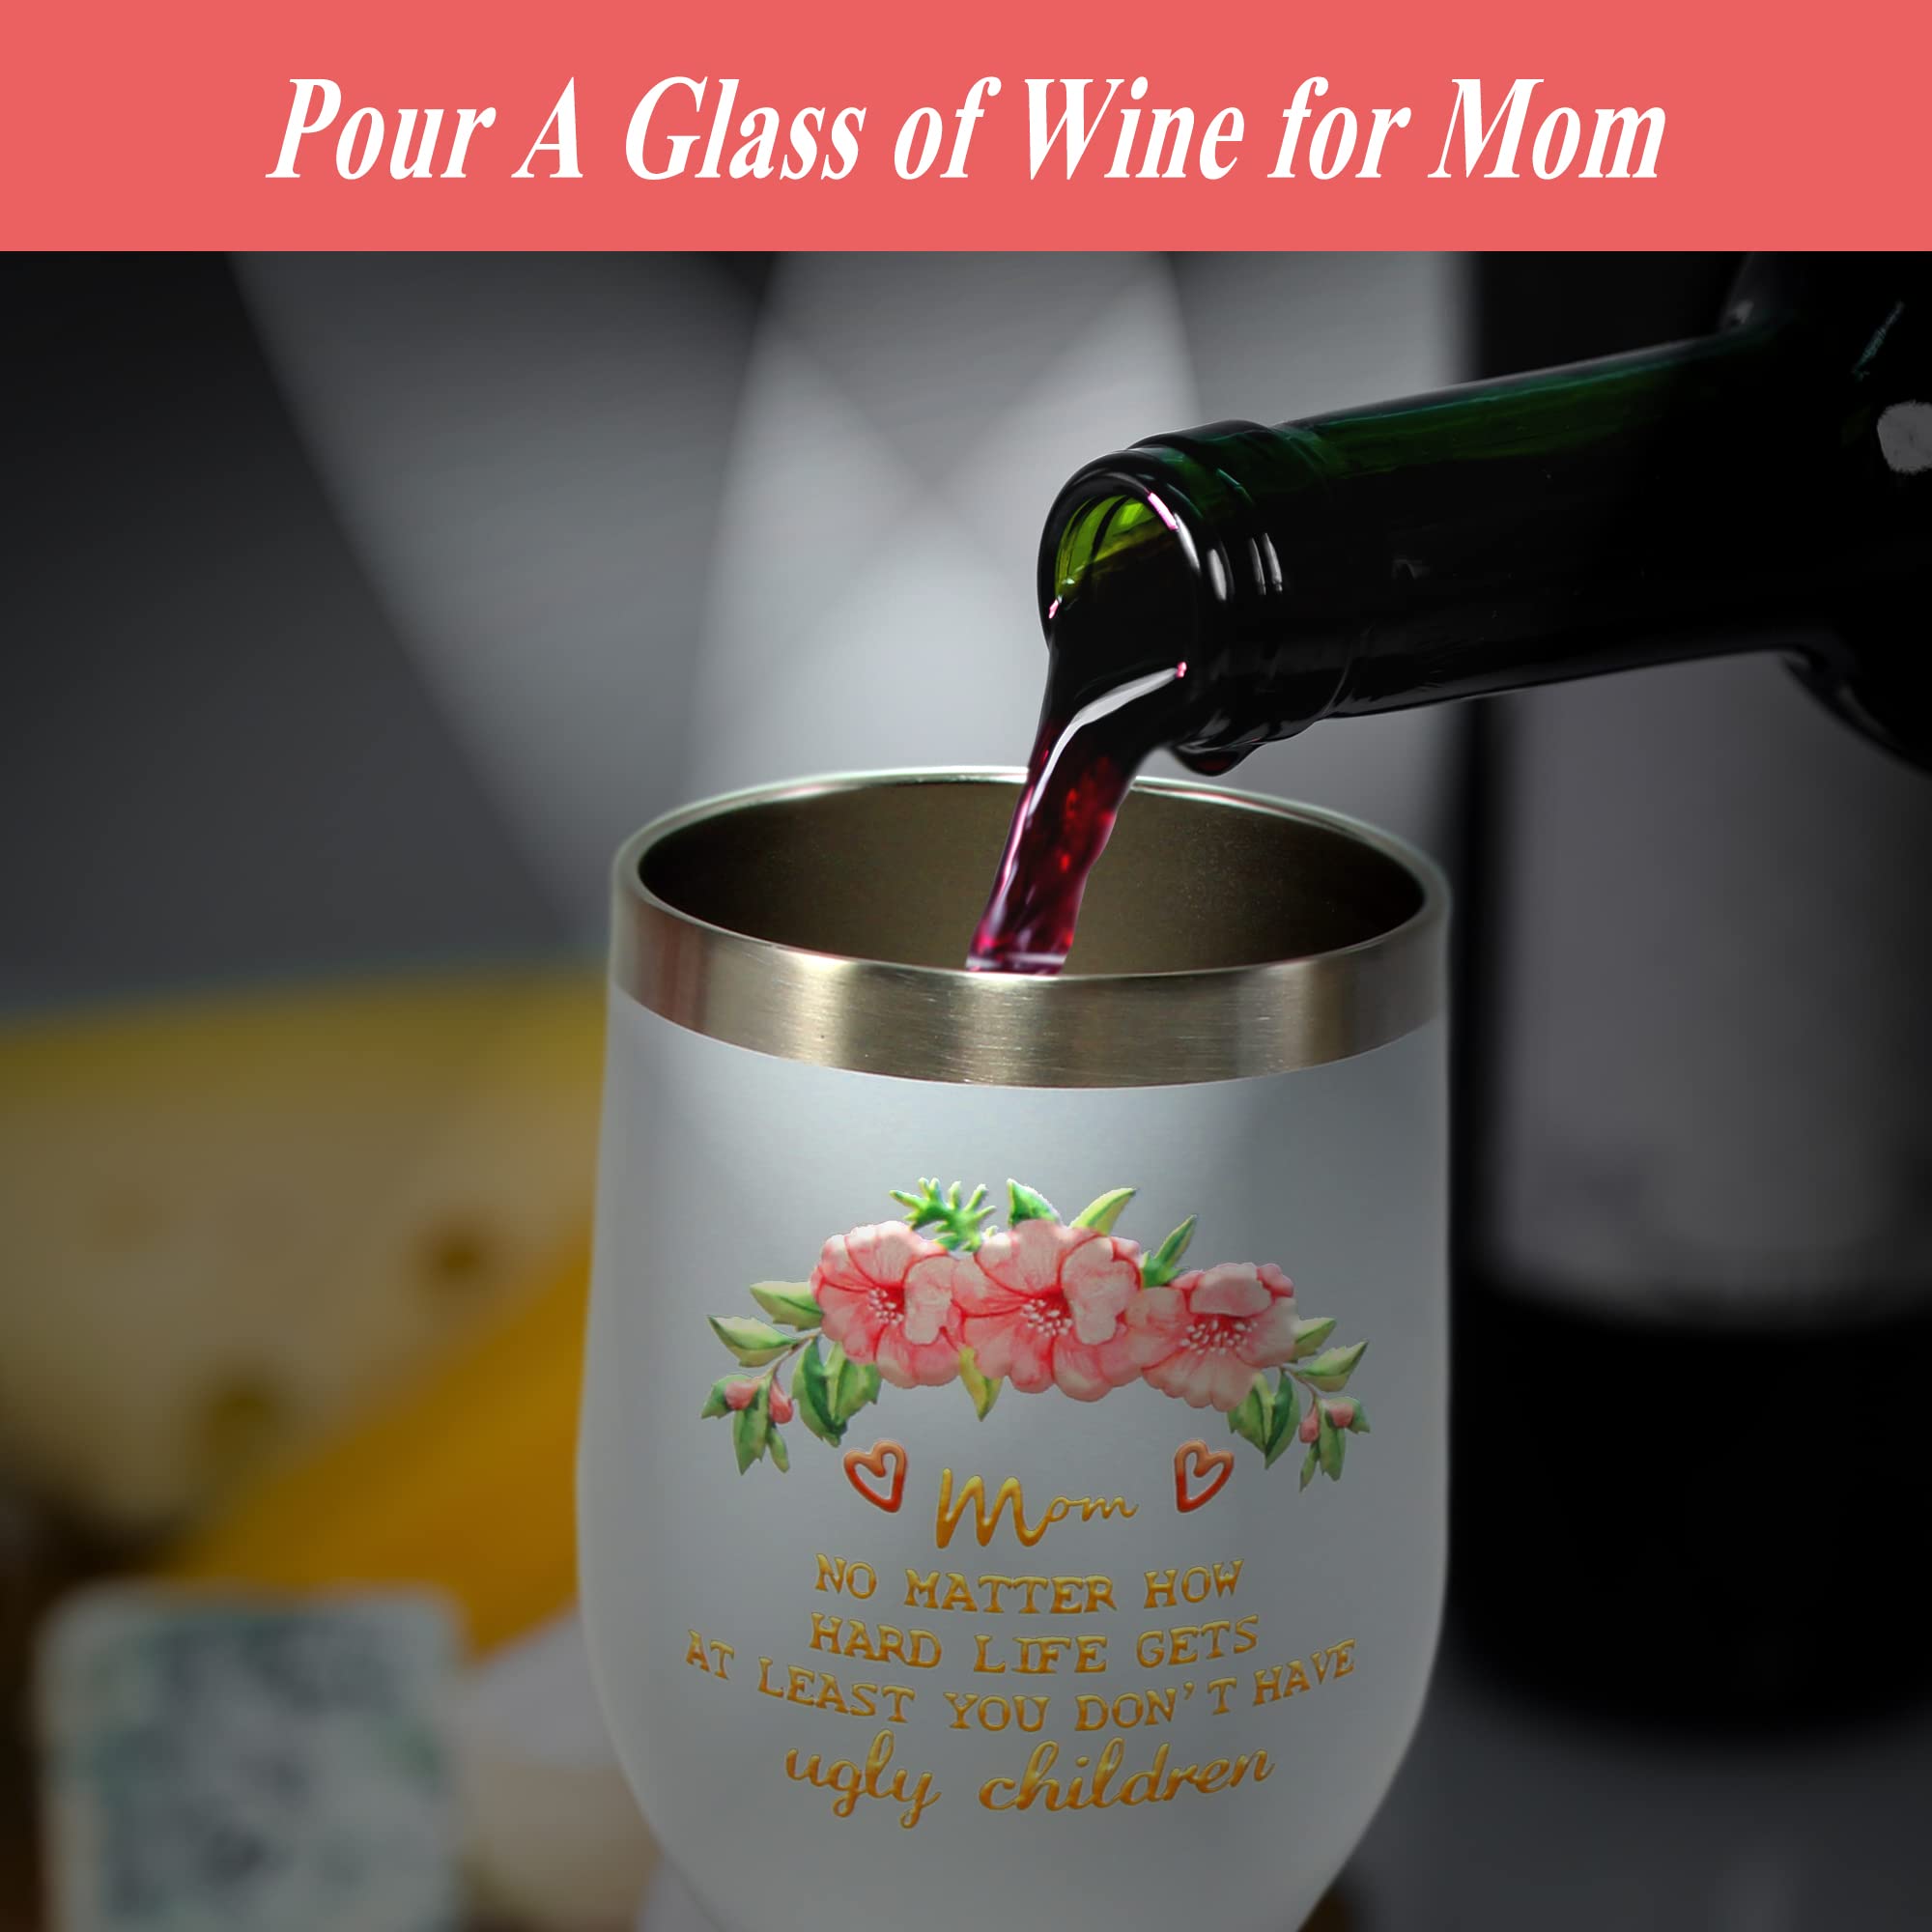 MAMAGIFTREE 12oz Insulated Wine Tumbler with Lid - Best Grandma Ever Stainless Steel Wine Glass - Perfect Grandma Gifts - Thoughtful Grandma Birthday Gifts for Wine Lovers